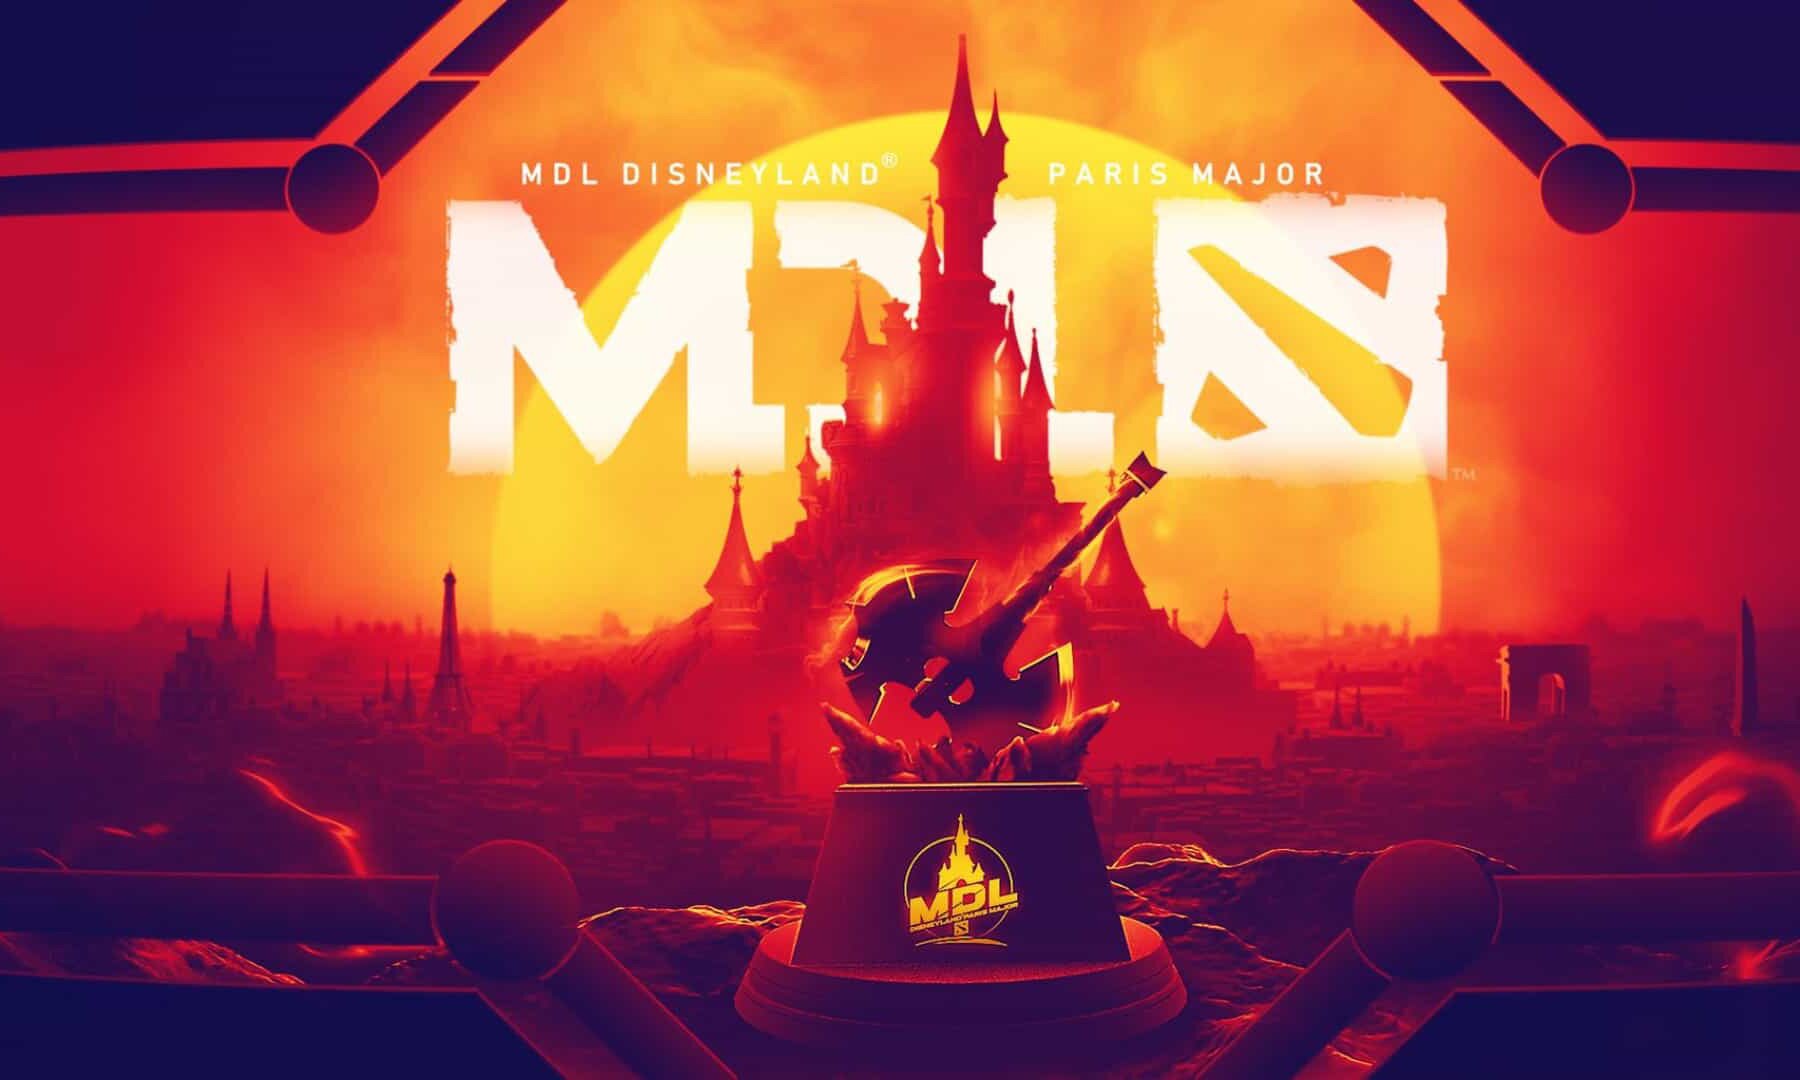 Dota 2 meets Disney as the DPC heads to Disneyland Paris. Whose dreams will come true and who will be eliminated from the happiest place on Earth?